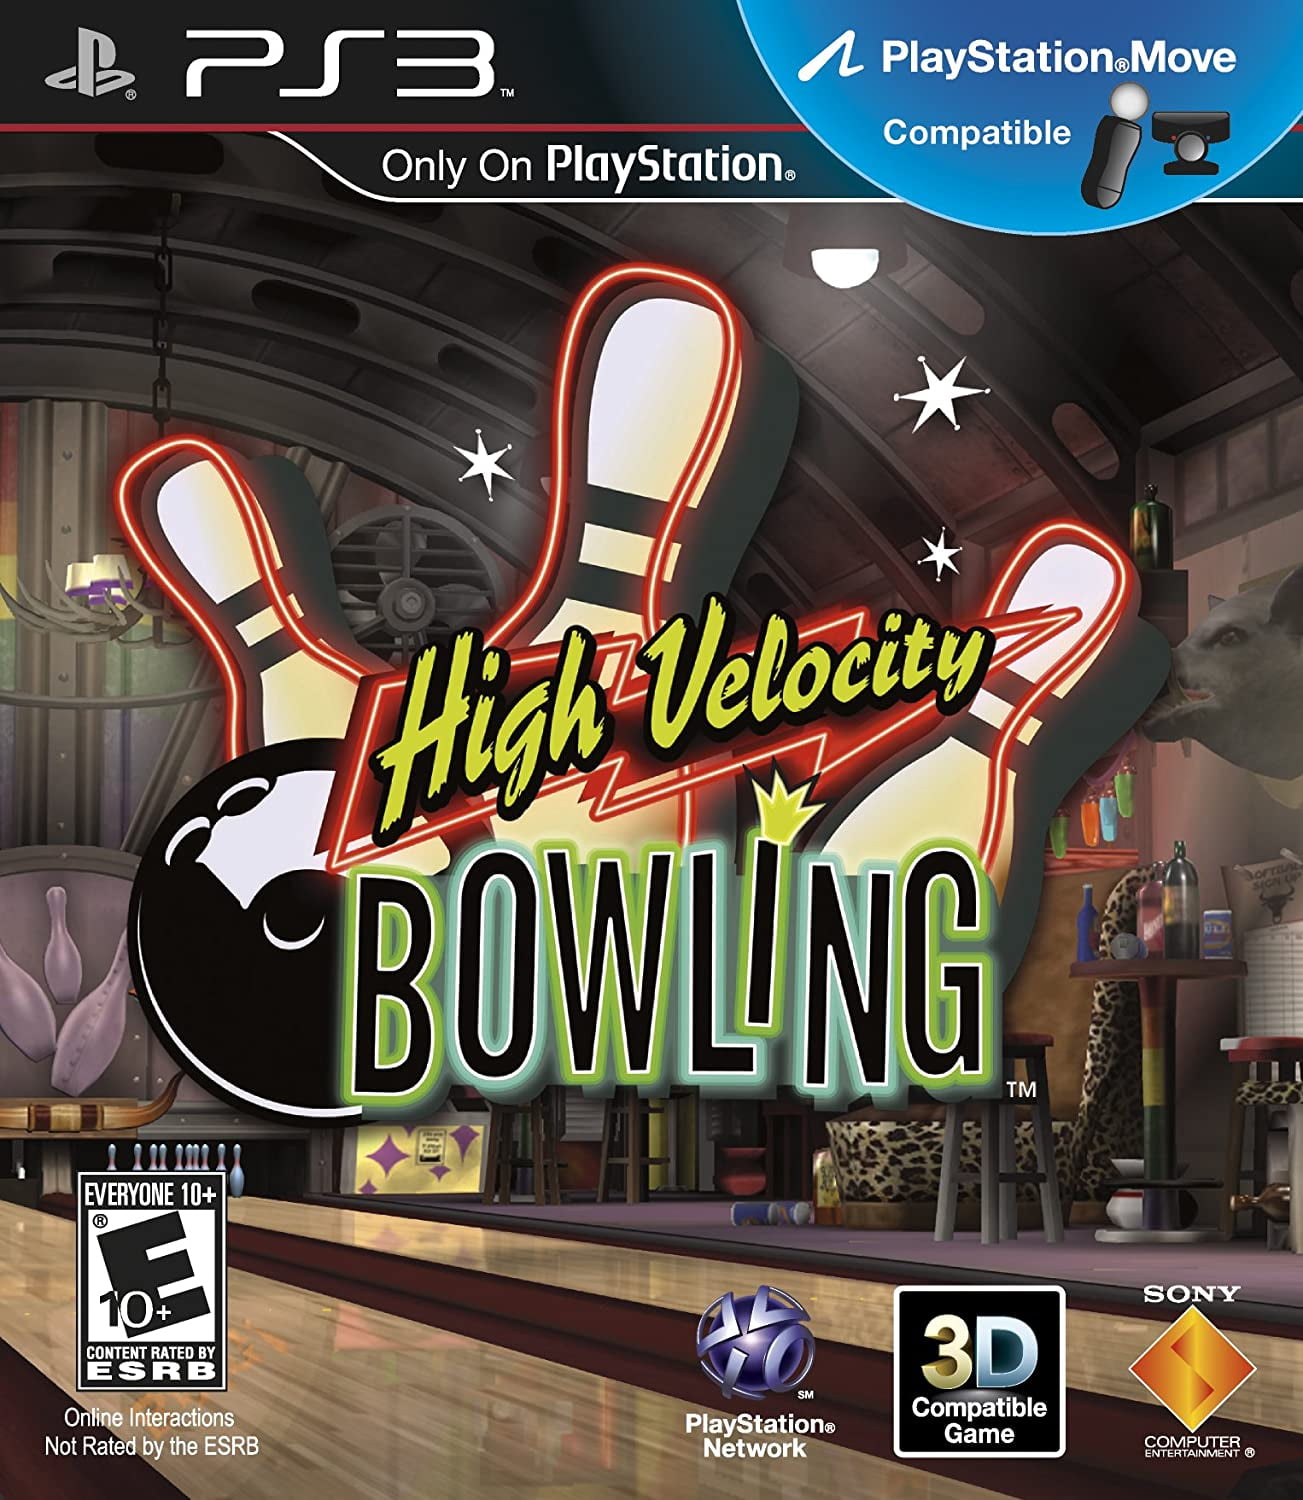 High Velocity Bowling PS3 Playstation 3 Video Game - Playstation Move Compatible